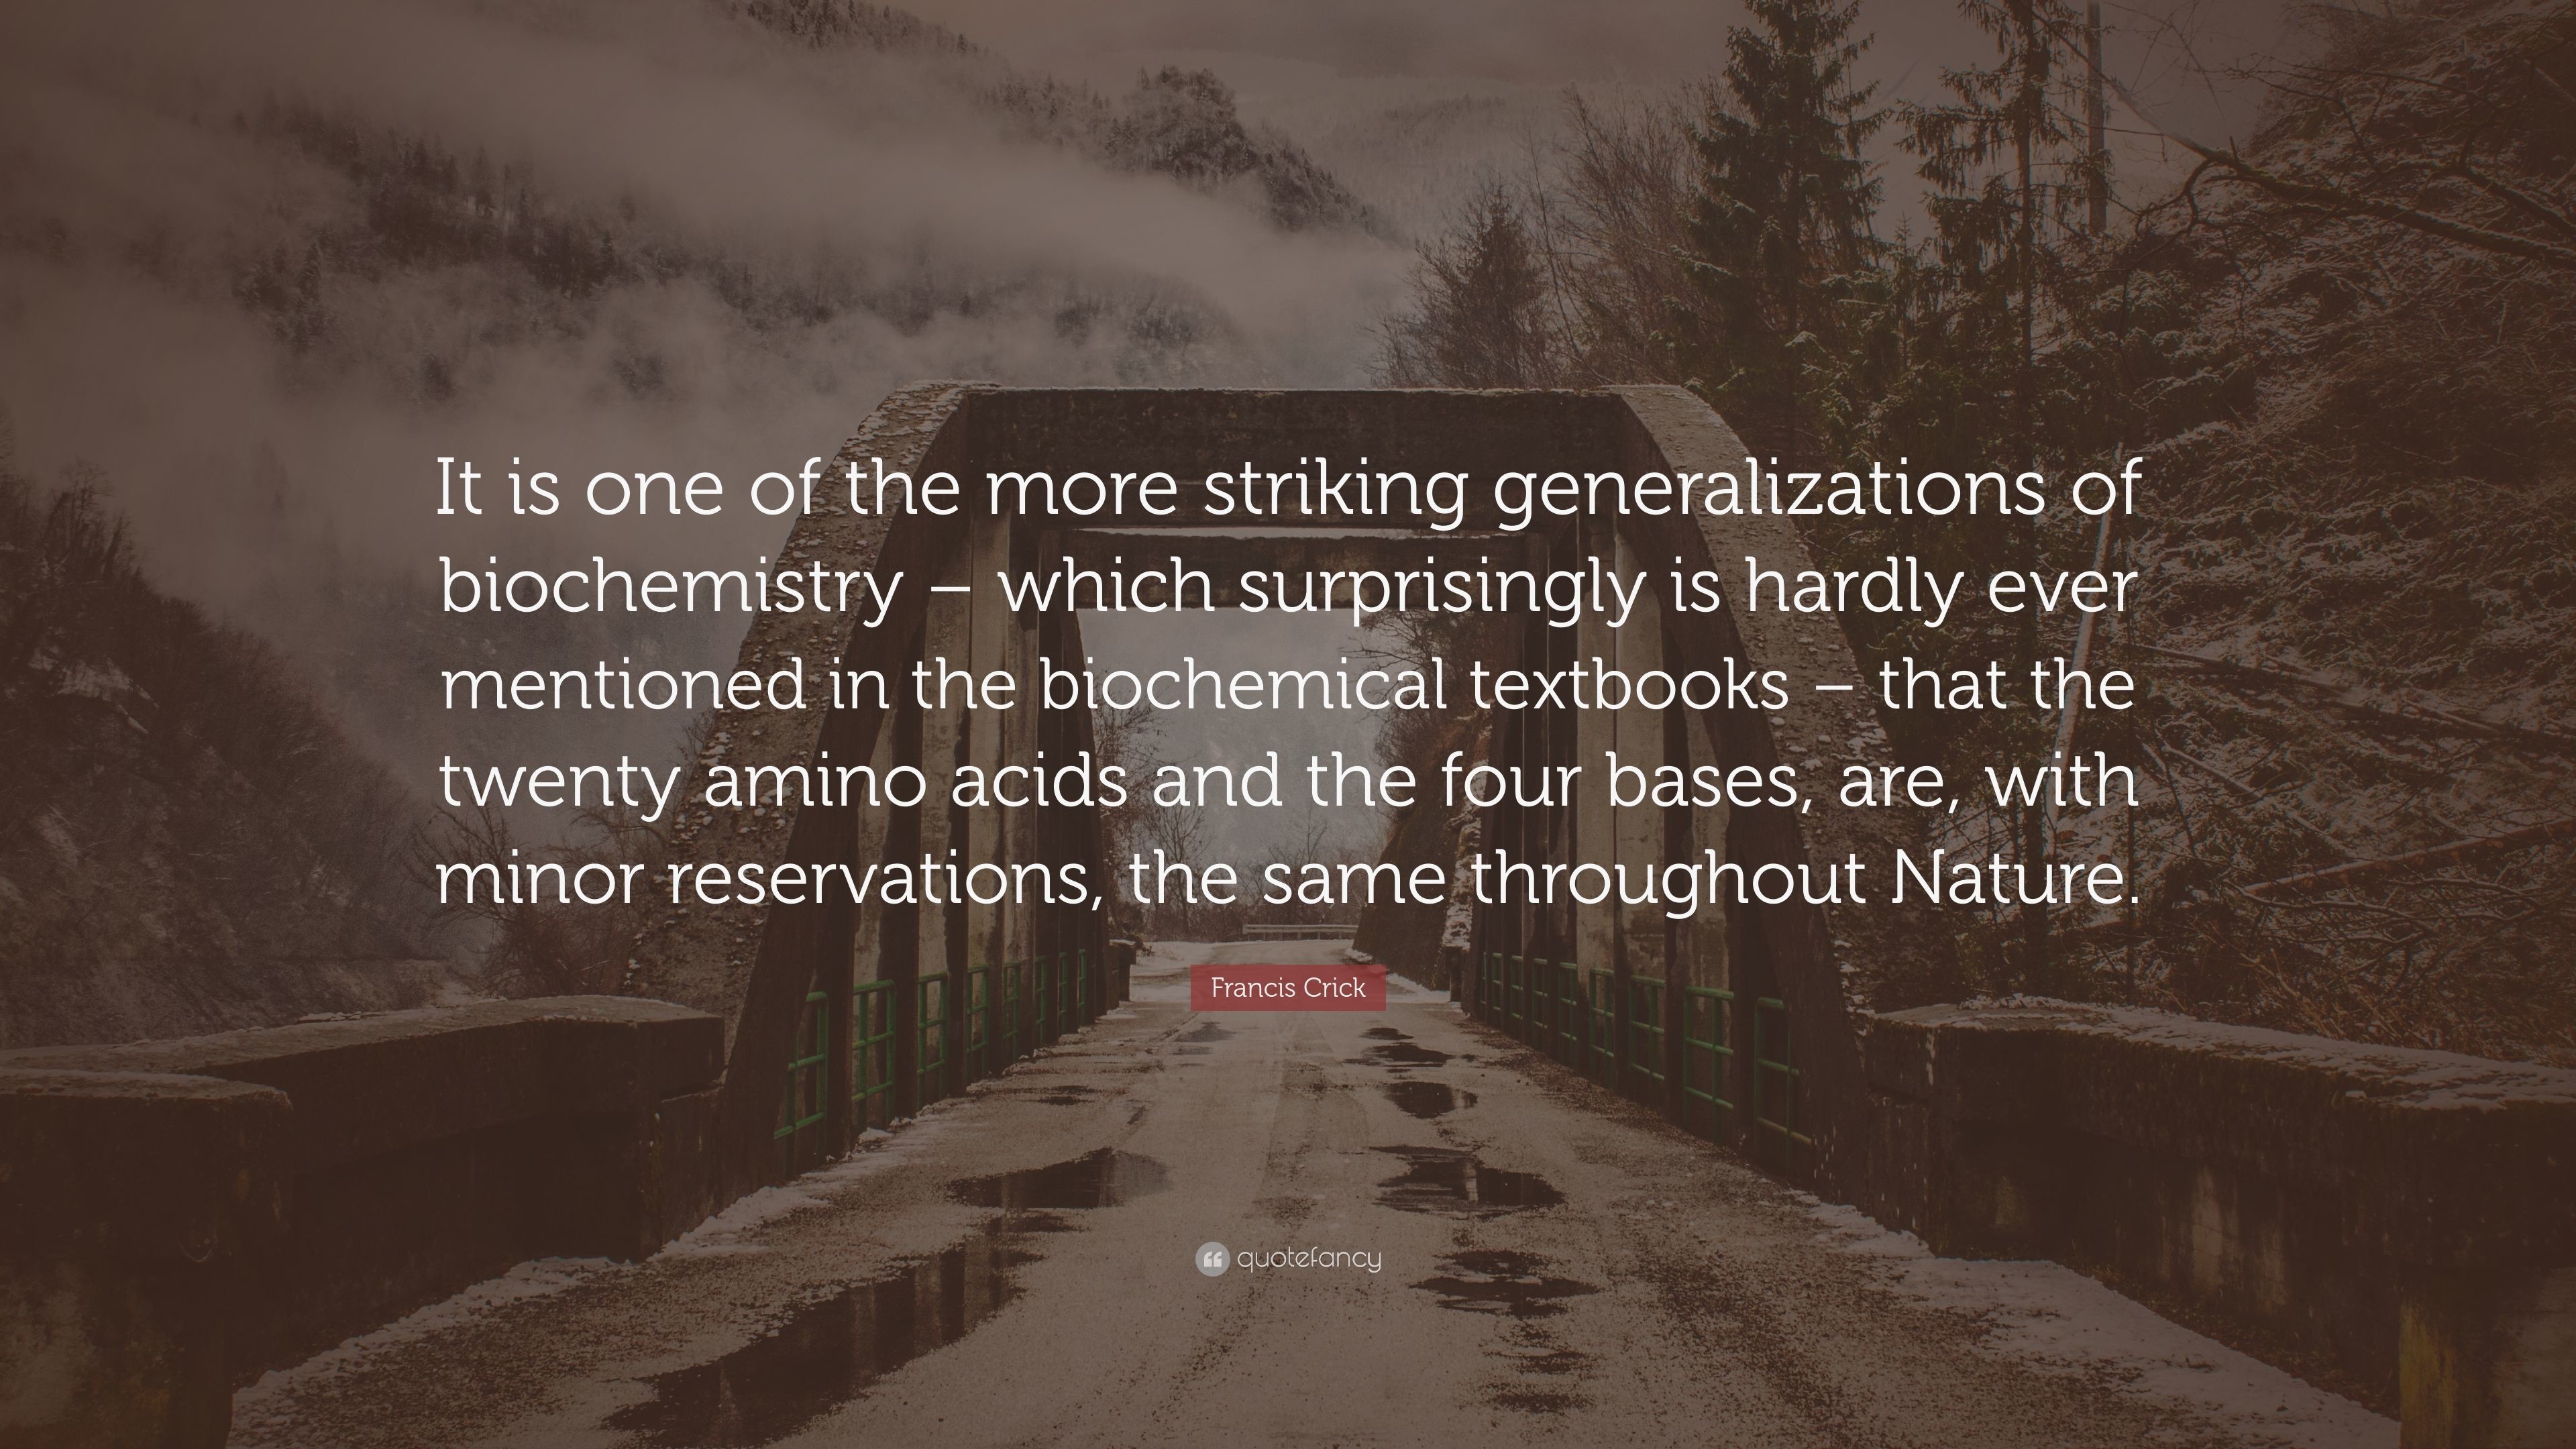 3840x2160 Francis Crick Quote: “It is one of the more striking generalizations of  biochemistry –